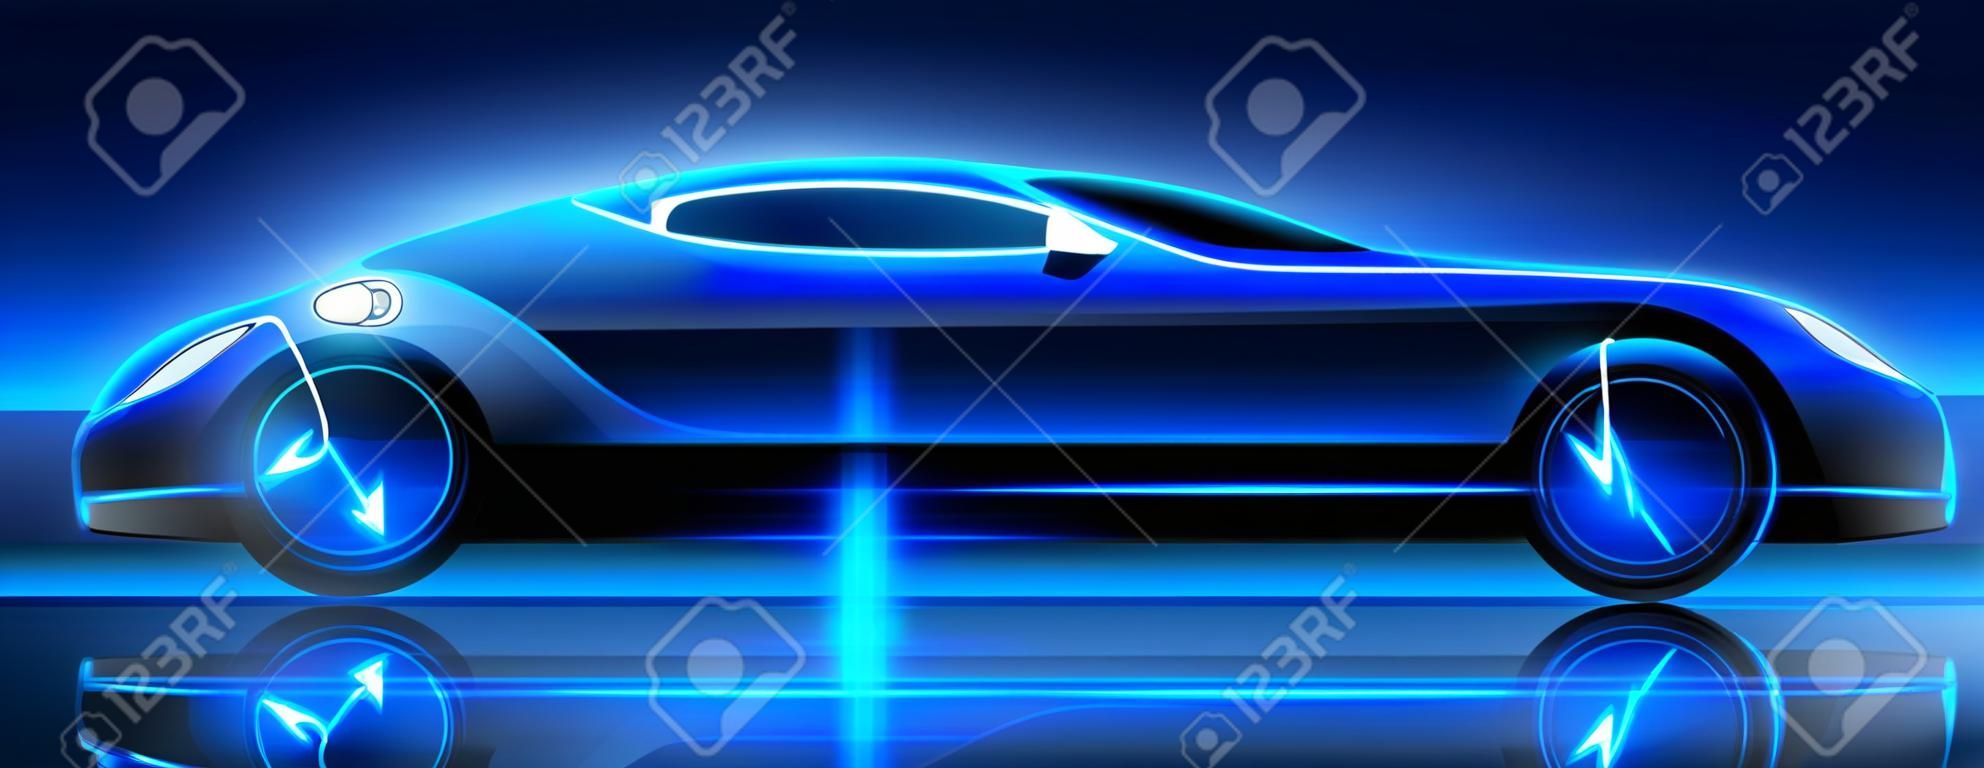 Electric car charging on the station, vector illustration. Blue neon glowing EV vehicle filling up a battery. Modern hybrid car with voltage symbol on the wheel.